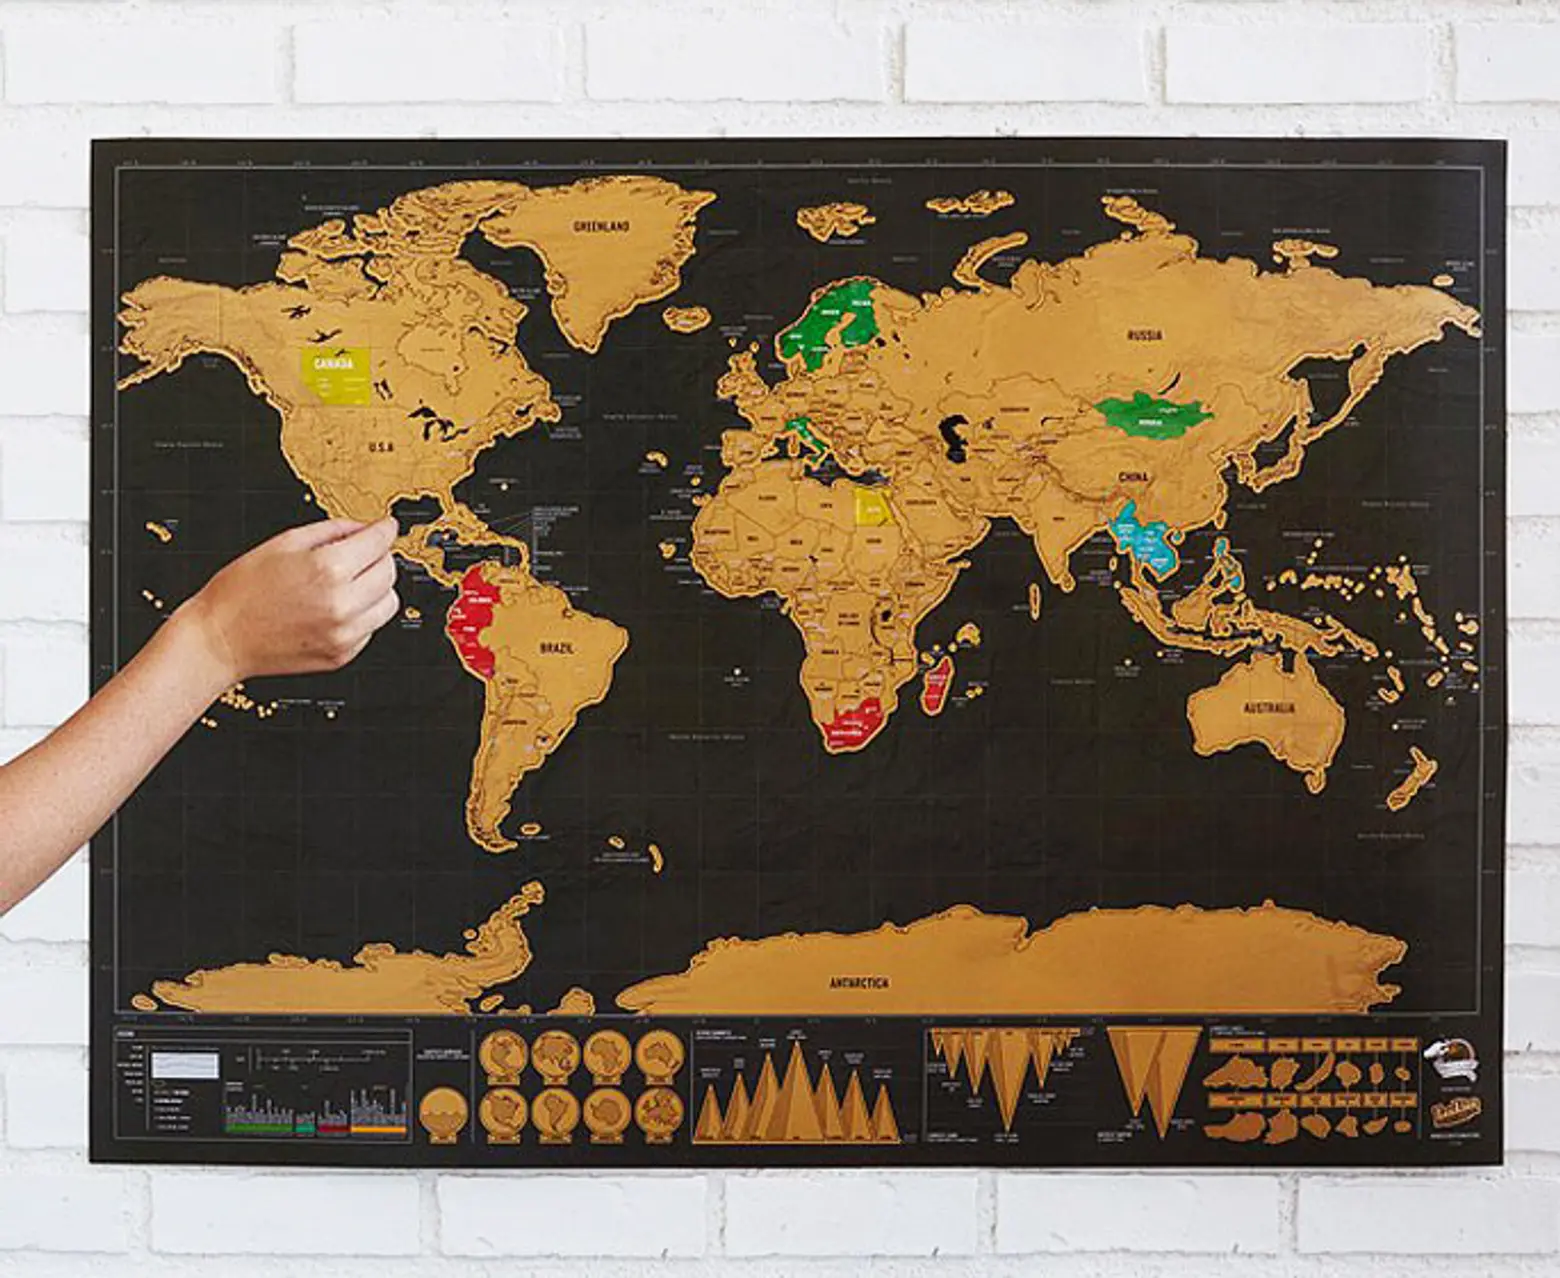 Keep Track of Your World Travels With This Colorful Scratch-off Map